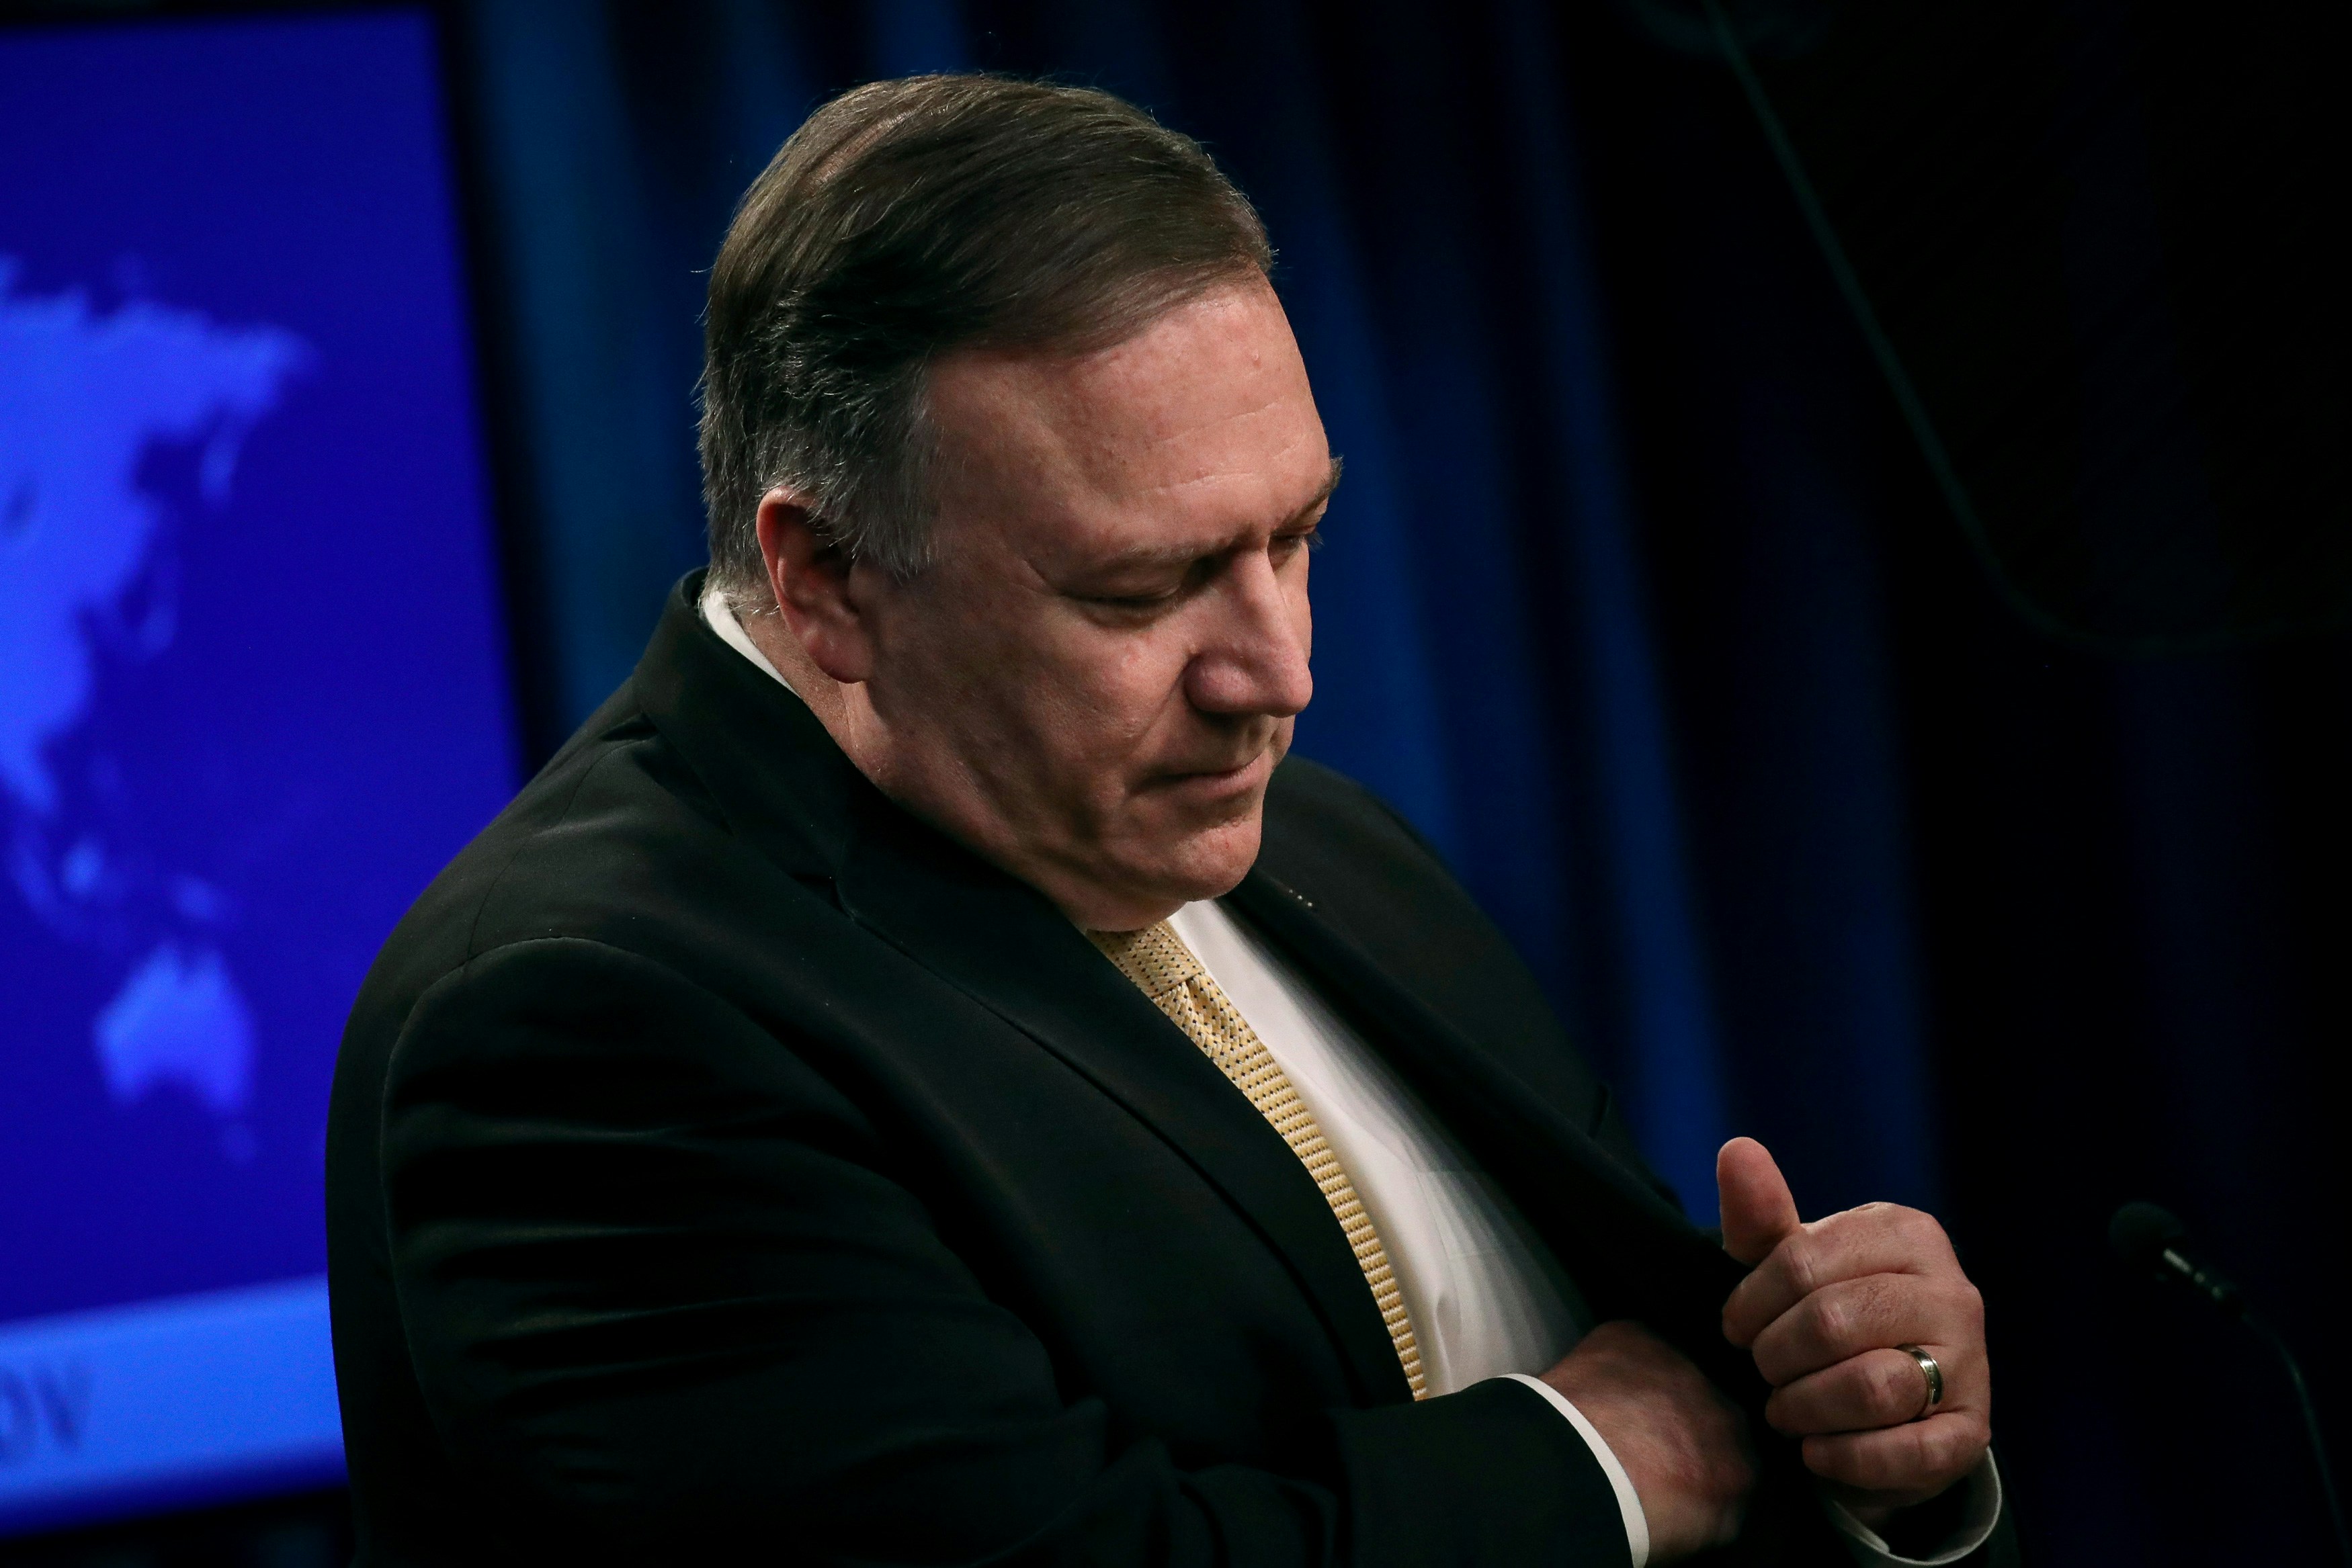 WASHINGTON, DC - NOVEMBER 18: U.S. Secretary of State Mike Pompeo pauses while speaking during a press conference at the U.S. Department of State on November 18, 2019 in Washington, DC.  Pompeo announced that the Trump administration does not consider Israeli settlements in the West Bank a violation of international law. Pompeo also spoke about protests in Iran, Iraq and Hong Kong. (Photo by Drew Angerer/Getty Images)